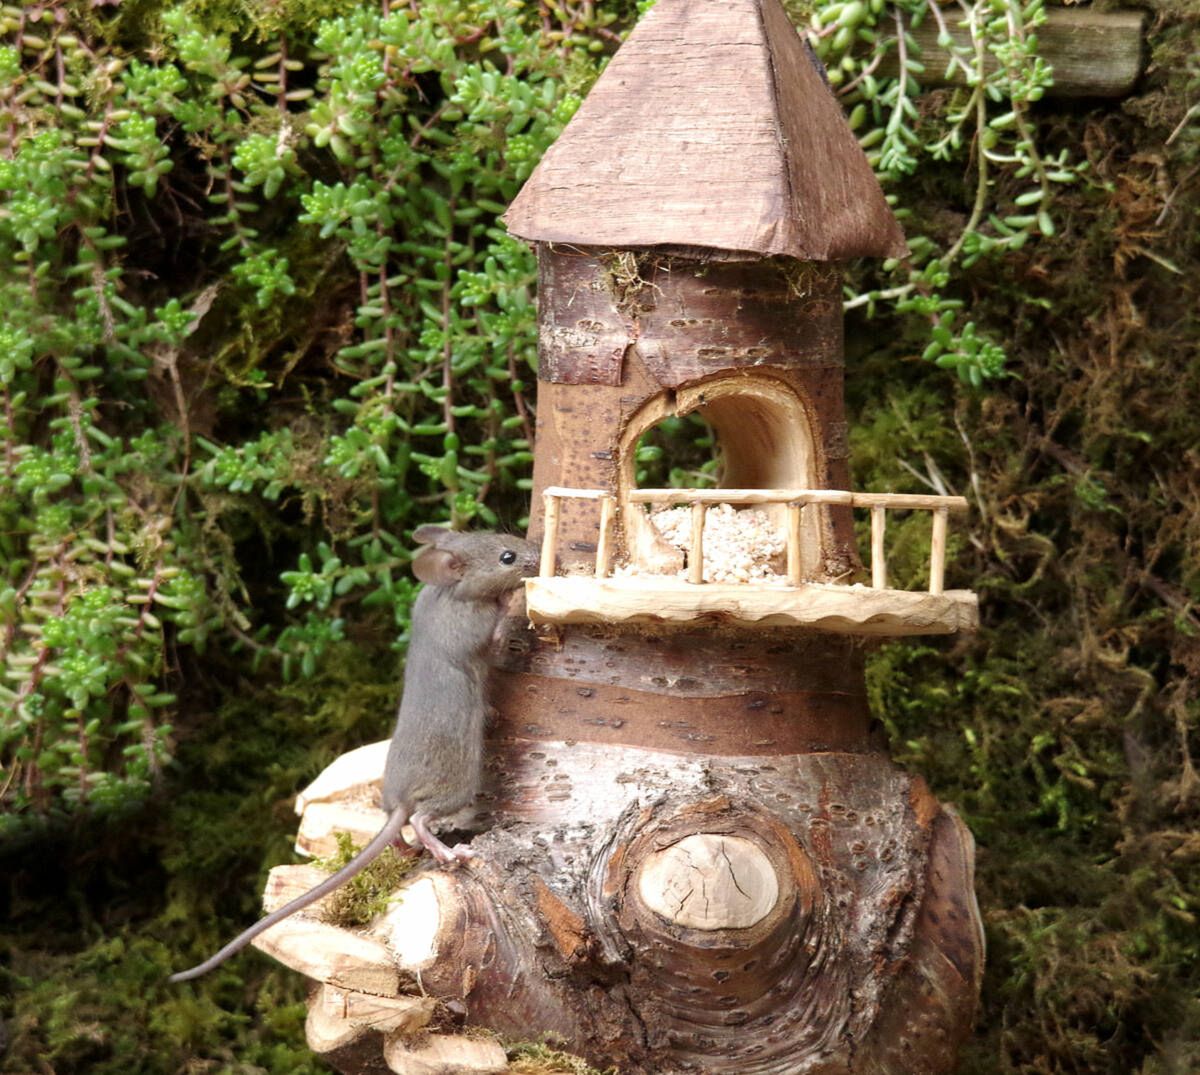 George the Mouse in a log pile house/facebook